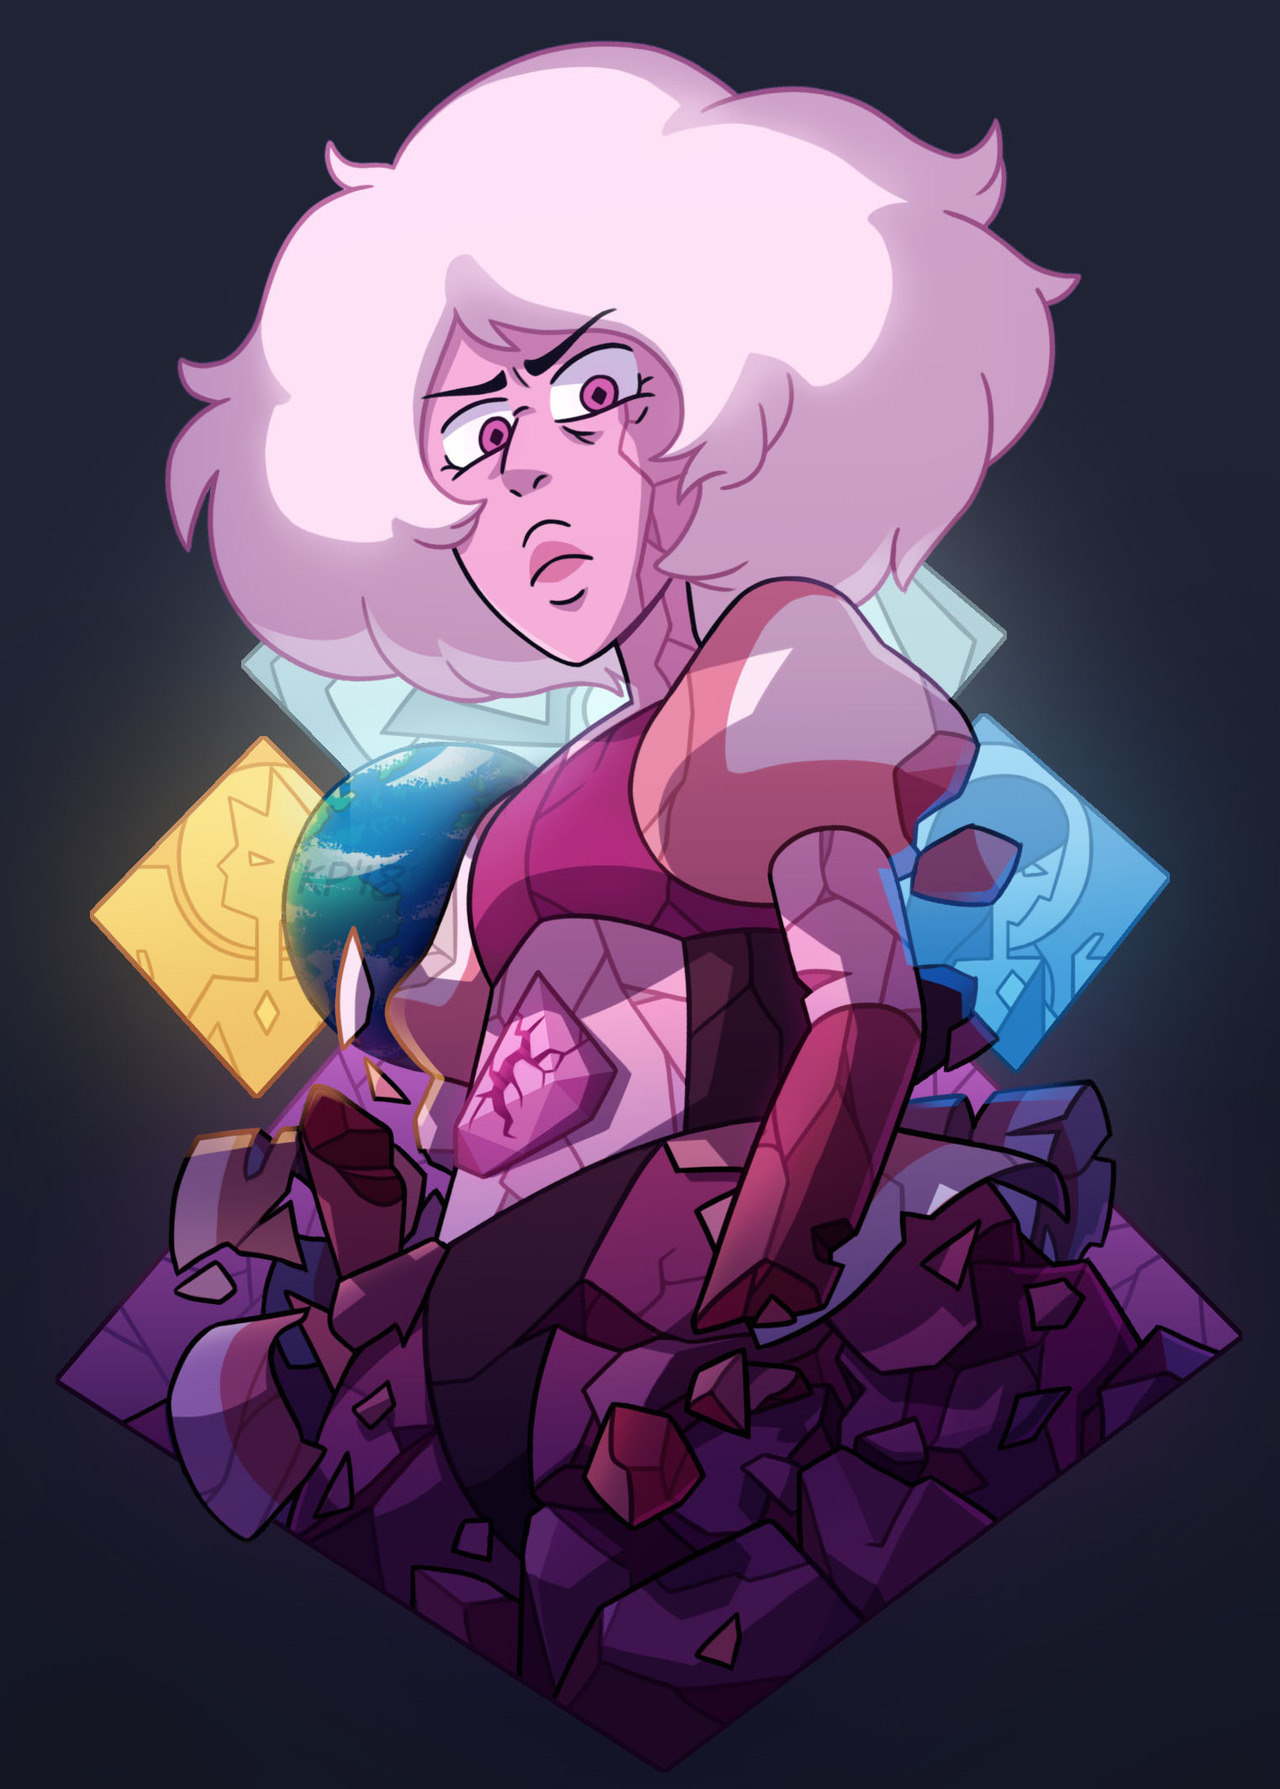 Pink Diamond This one nearly shattered my sanity to make but I’m really happy with how it turned out!💎 You can also get this on T shirts or stickers if you want to!